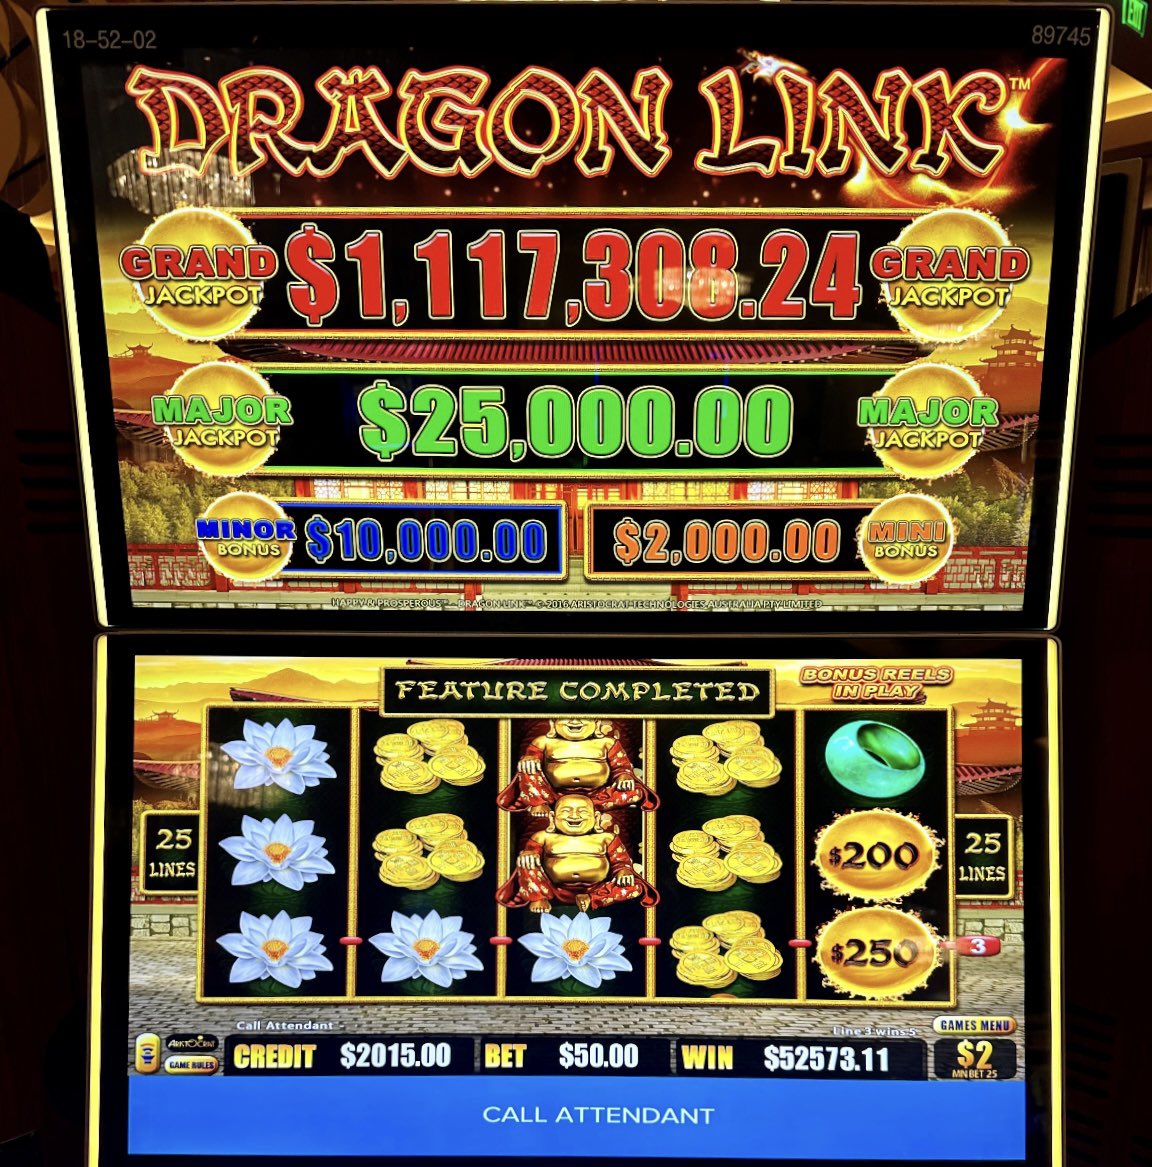 Congratulations to another lucky jackpot winner here at #hardrocktampa! This lucky guest won $52,573 on the Happy & Prosperous Dragon Link machine - multiplying their bet of $50 by about 1,000! 🤩

#anybodycanwin